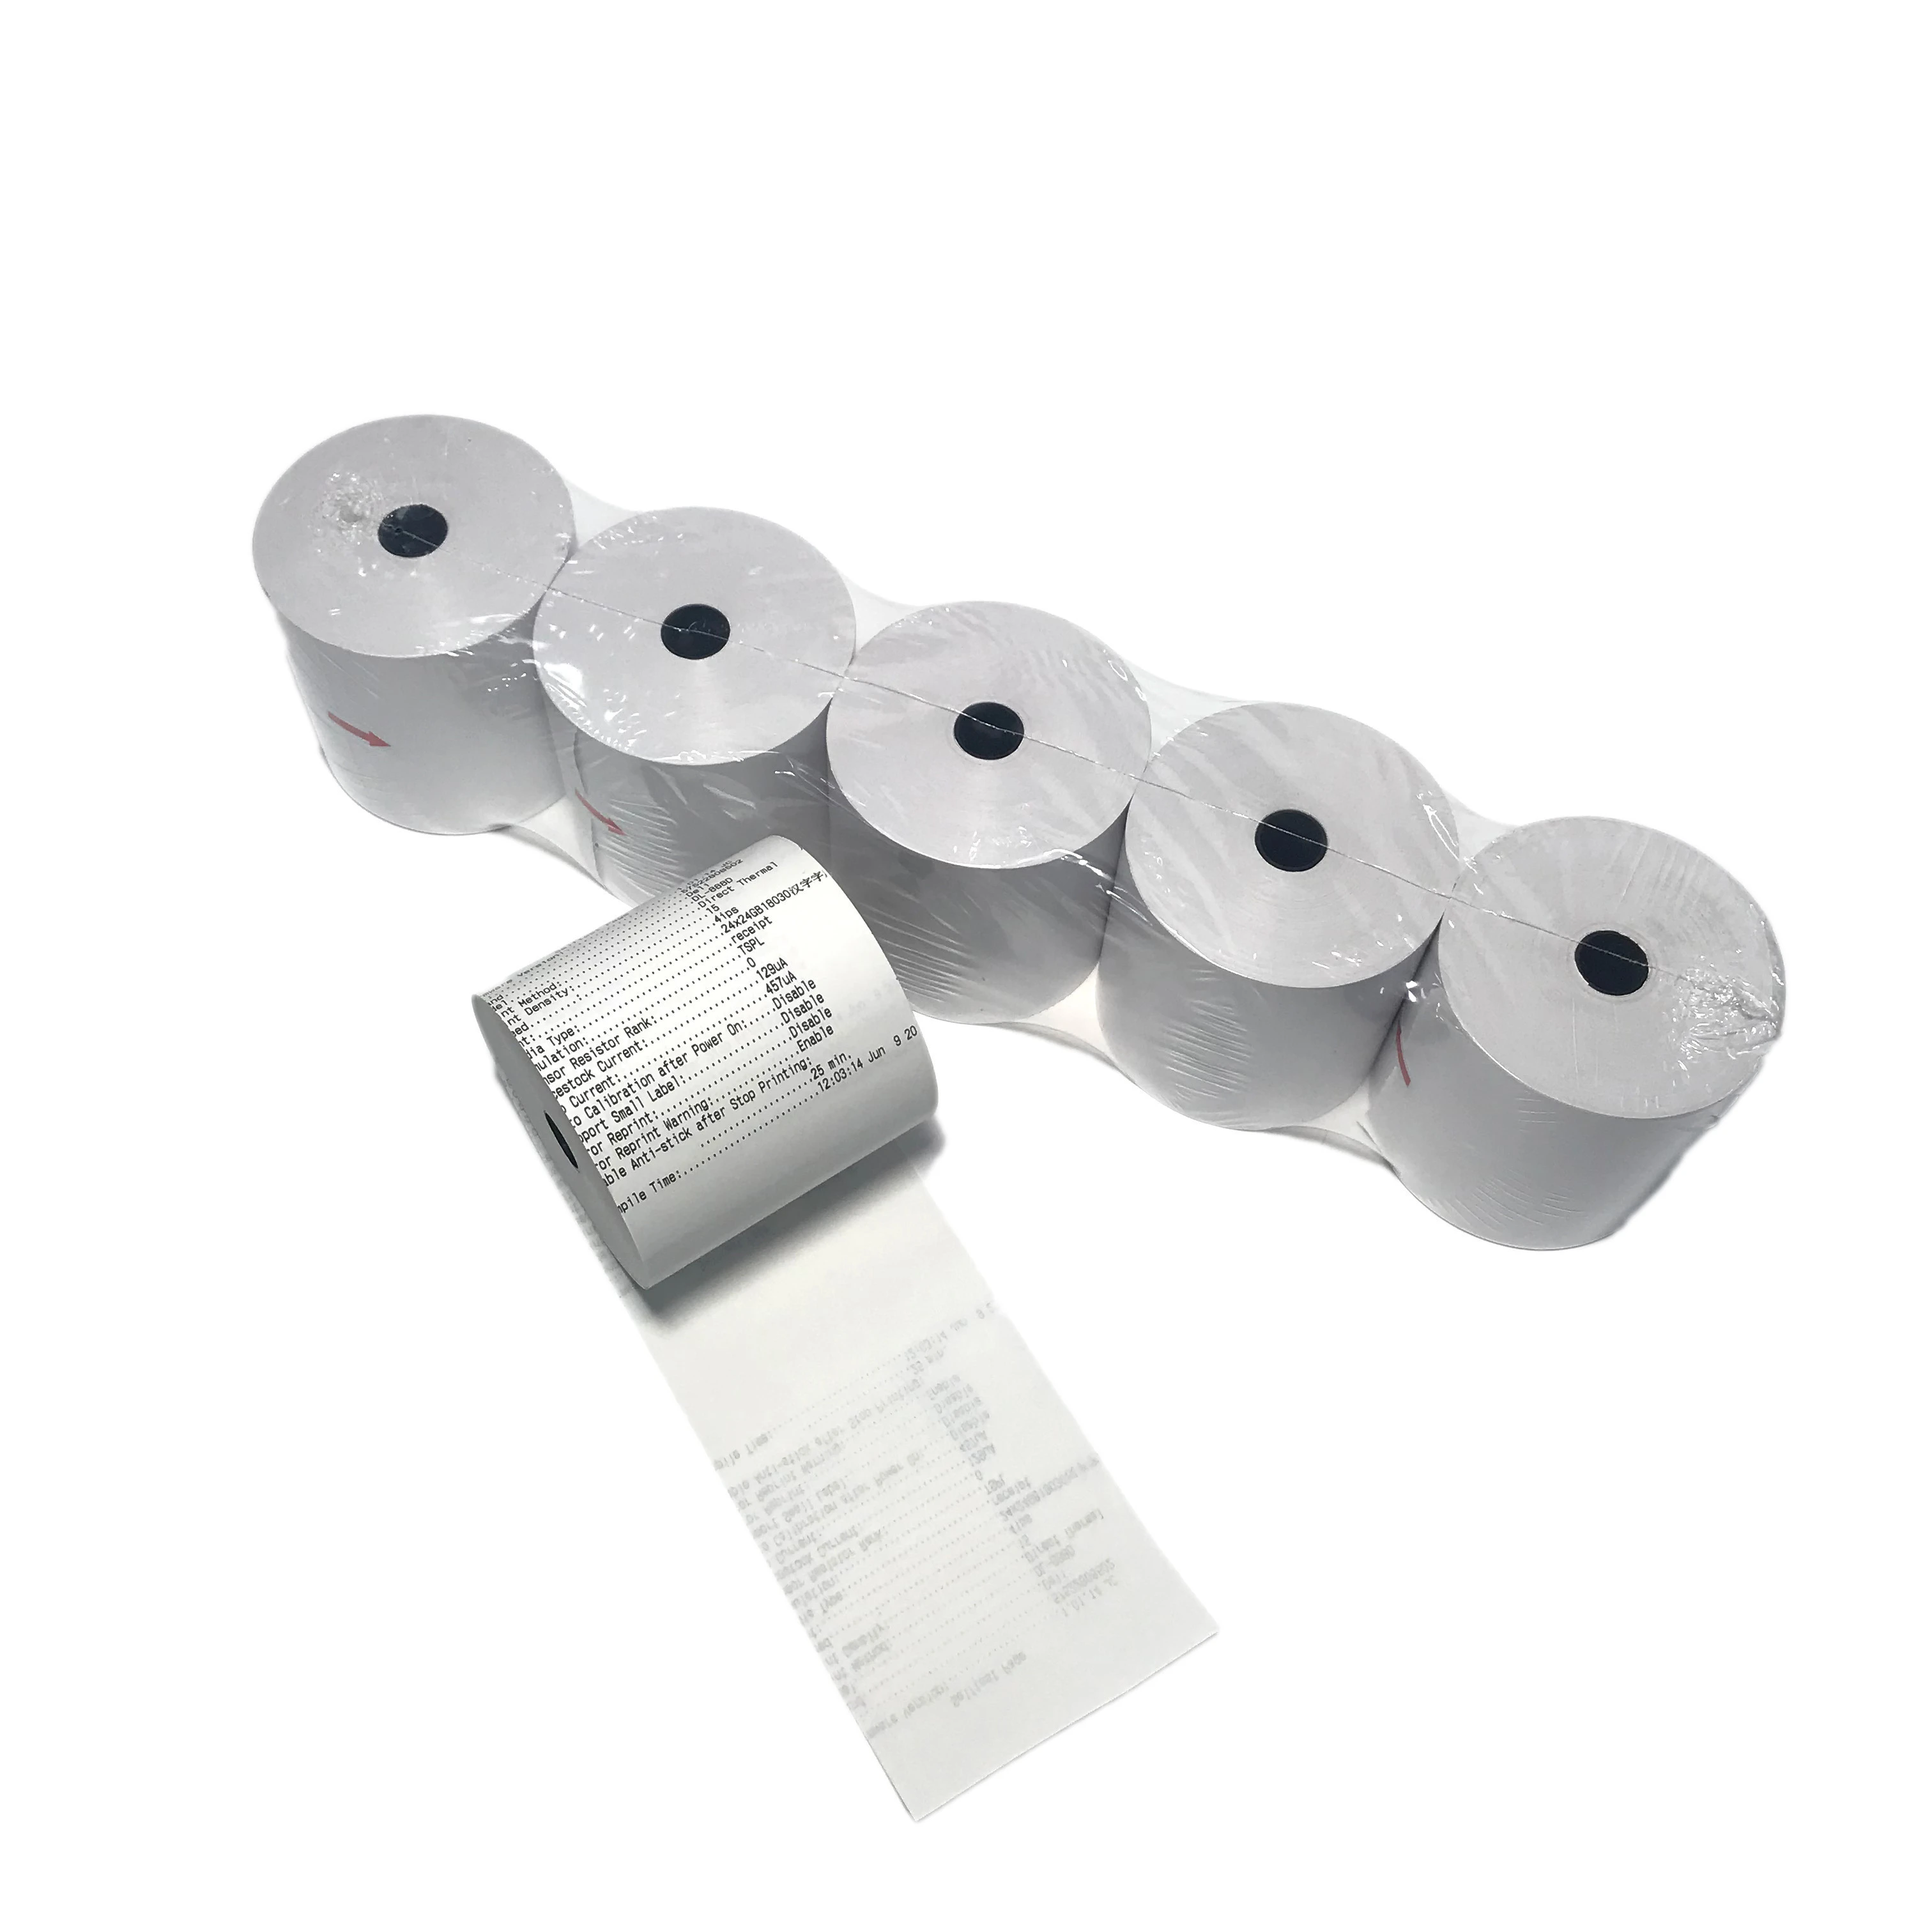 thermal paper roll with custom-made size to a printer fax machine